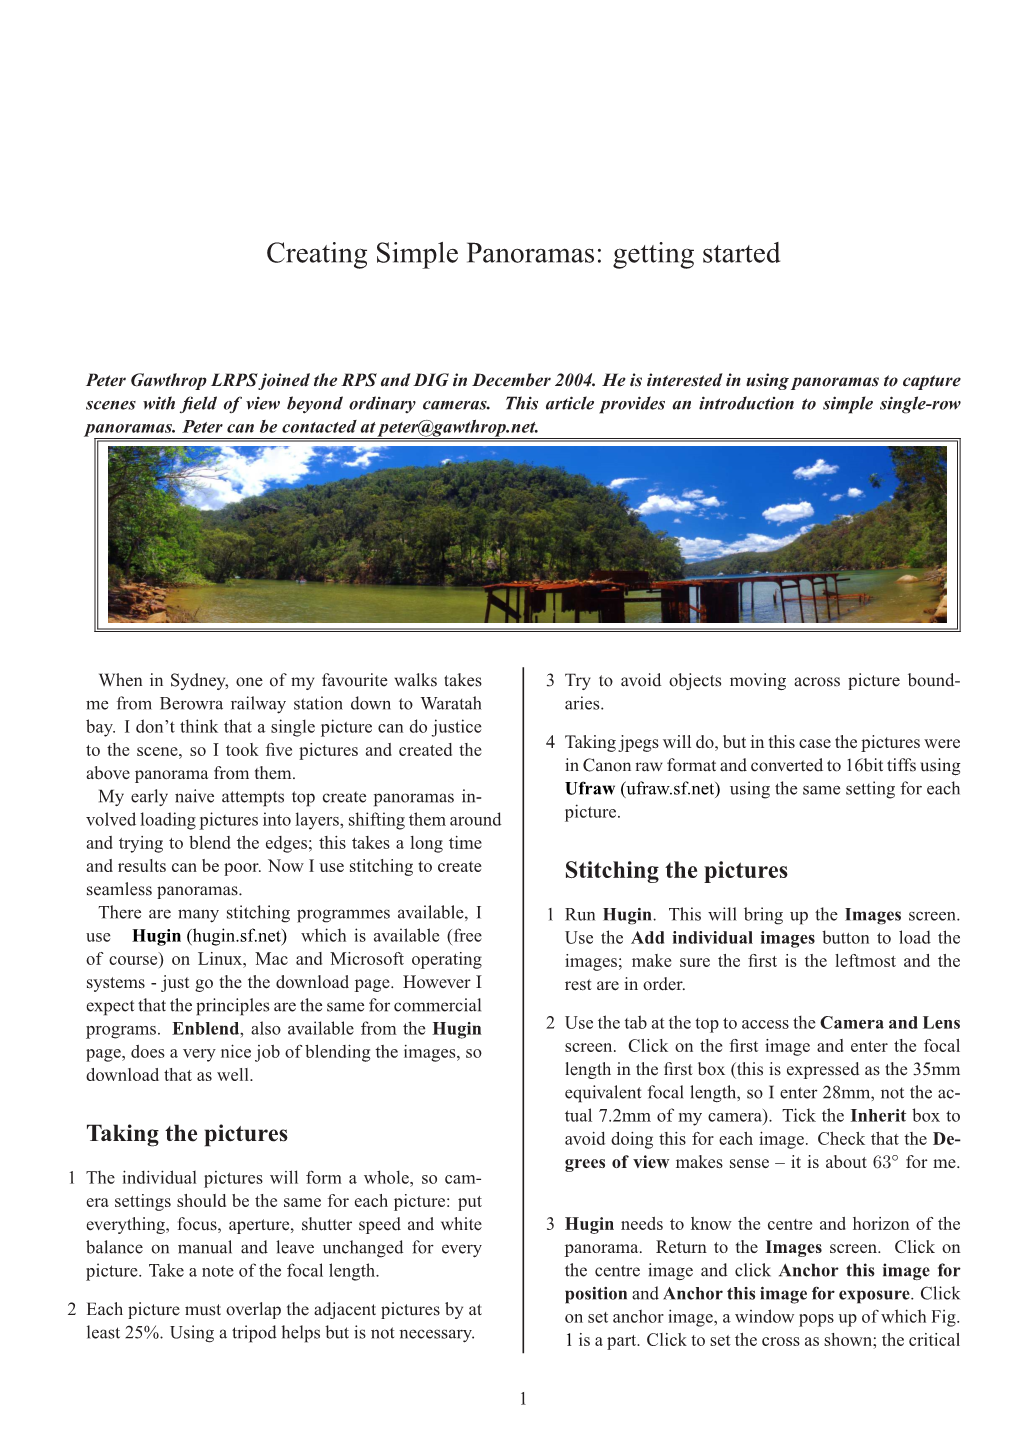 Creating Simple Panoramas: Getting Started